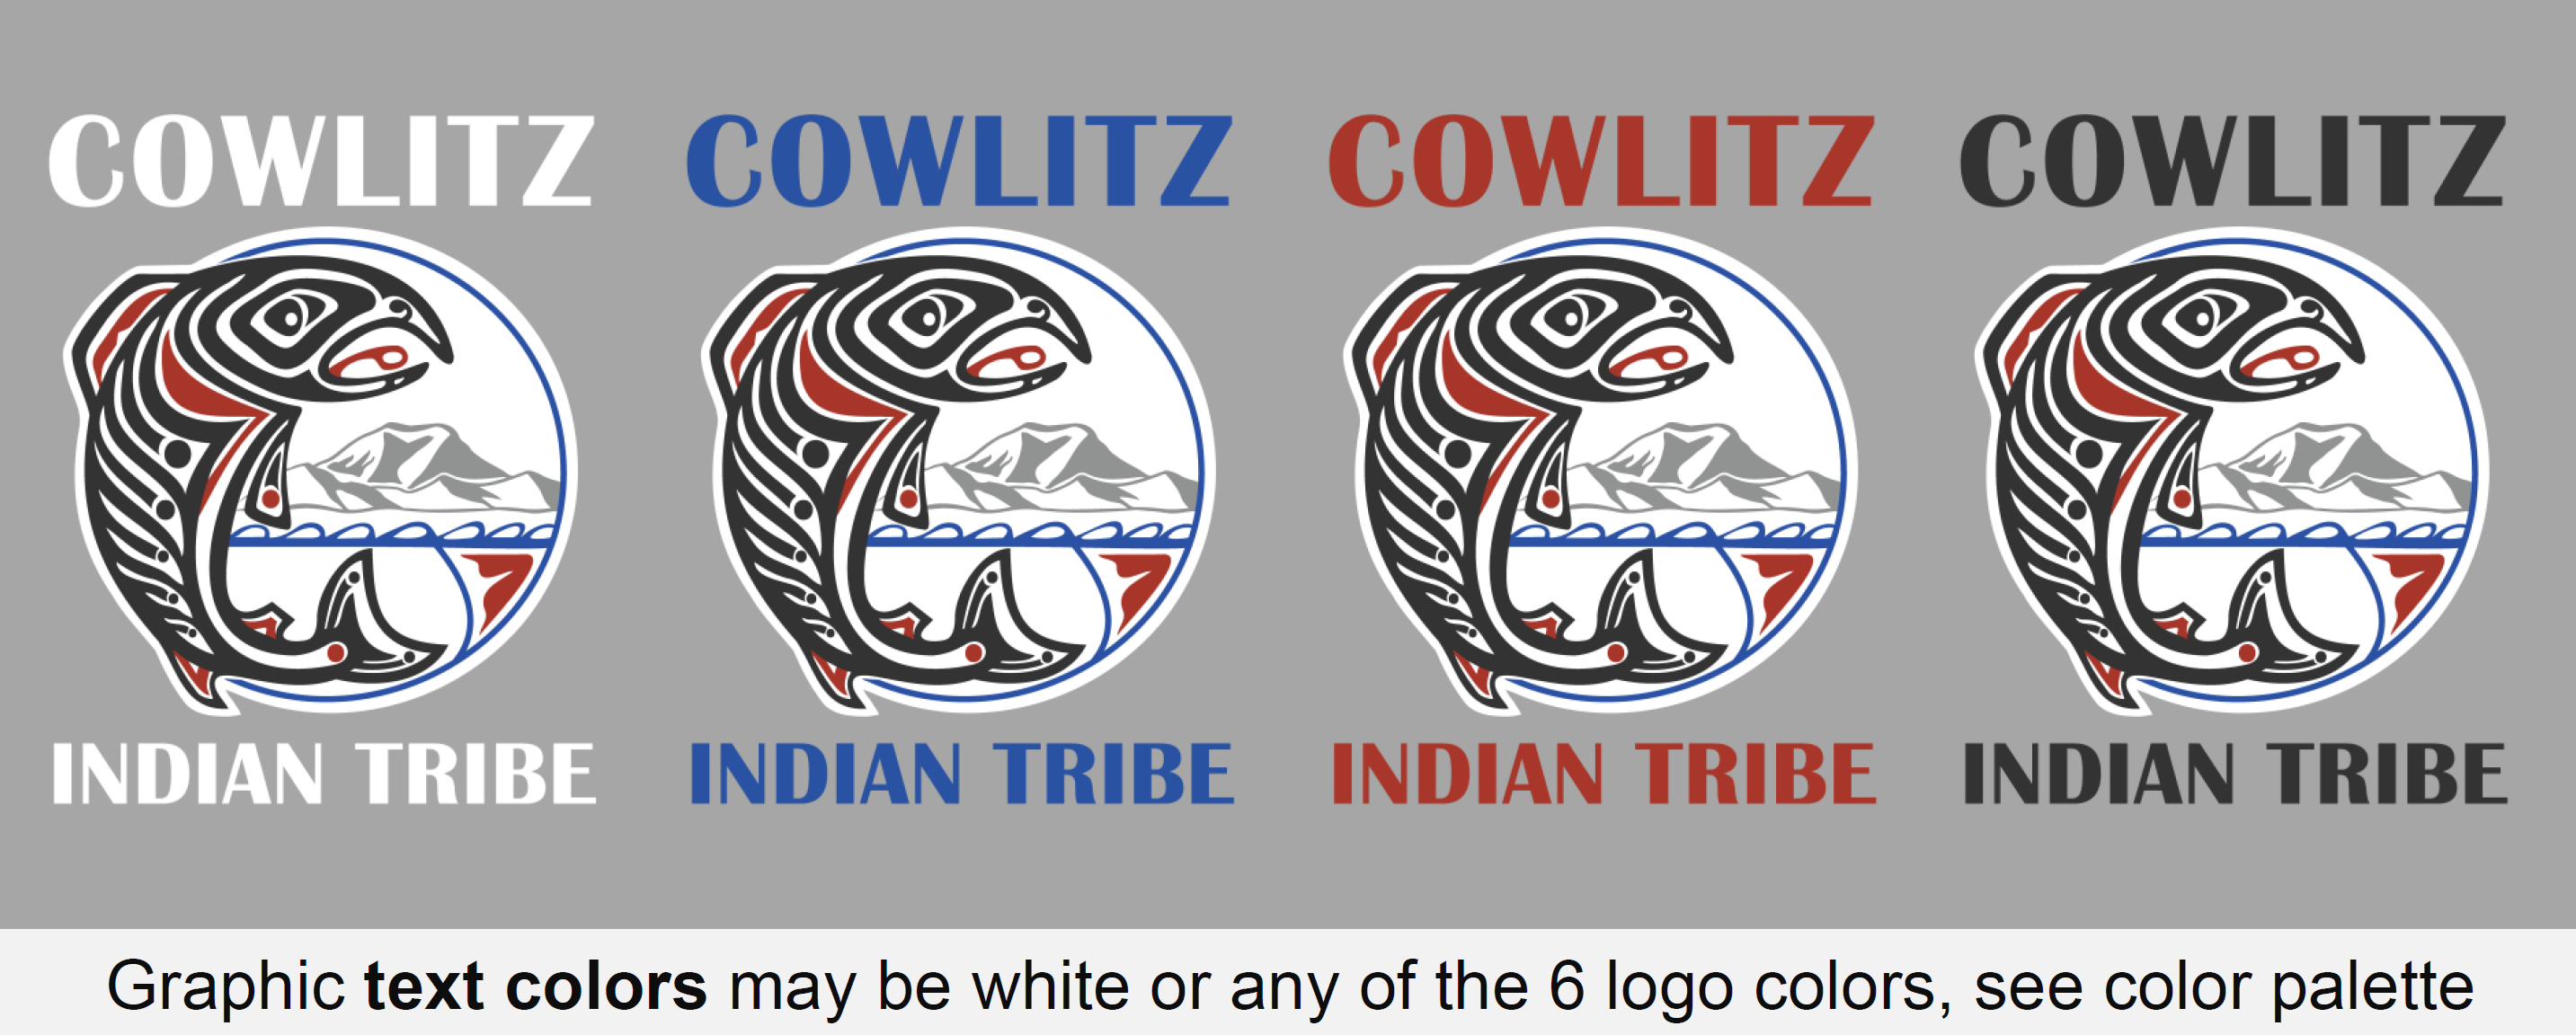 Image of Cowlitz Tribe Logo with bottom text: Cowlitz Indian Tribe